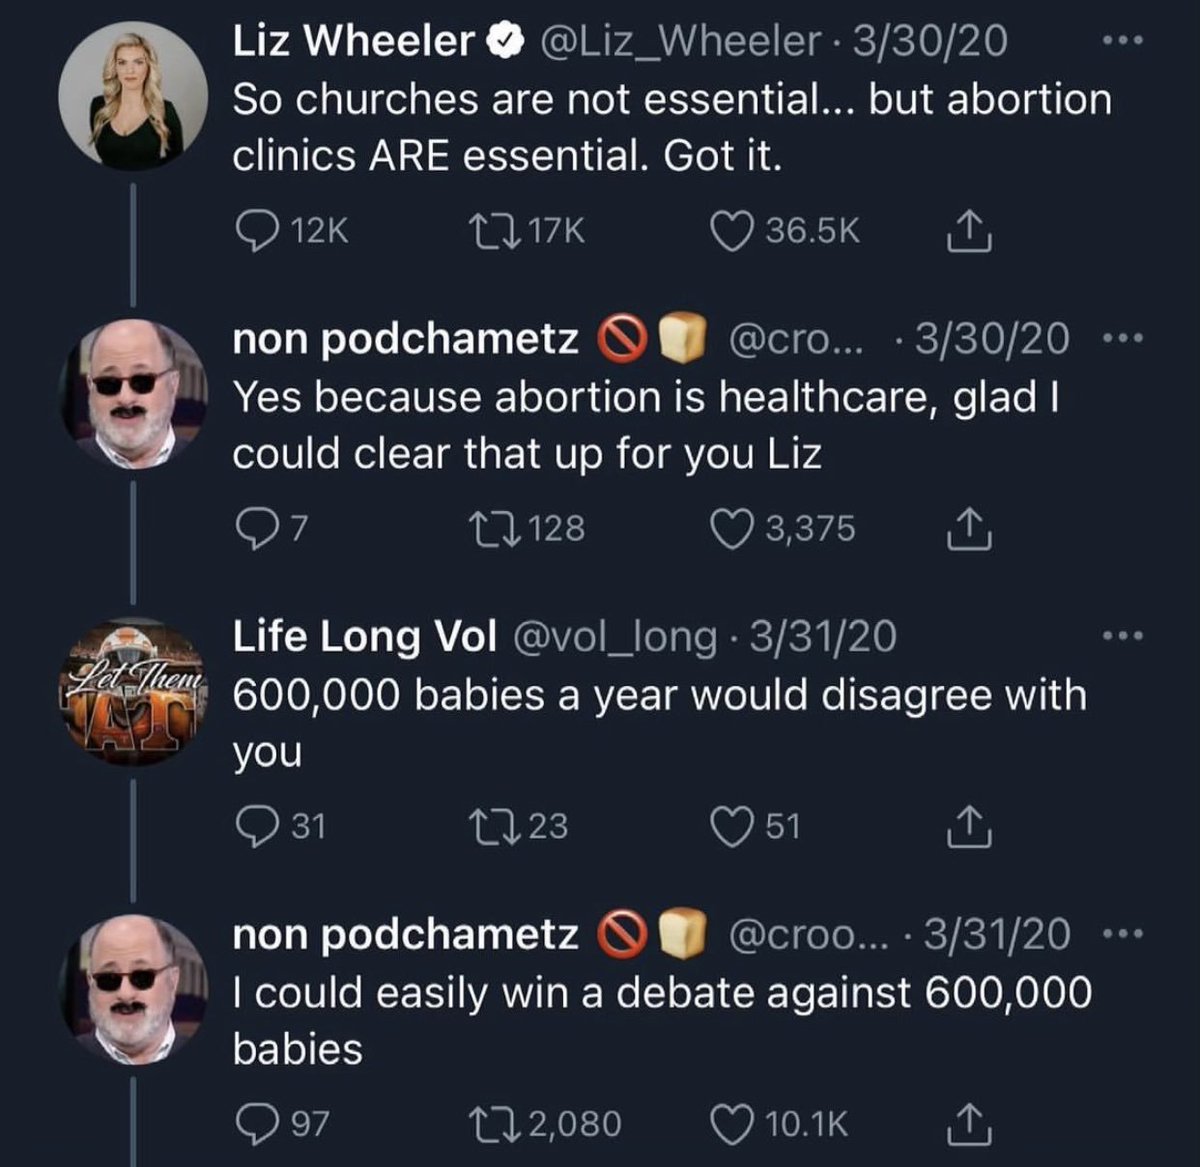 Best Tweets of All Time - could easily win a debate meme - Let Them Liz Wheeler 33020 So churches are not essential... but abortion clinics Are essential. Got it. 12K non podchametz ... 33020 Yes because abortion is healthcare, glad I could clear that up 